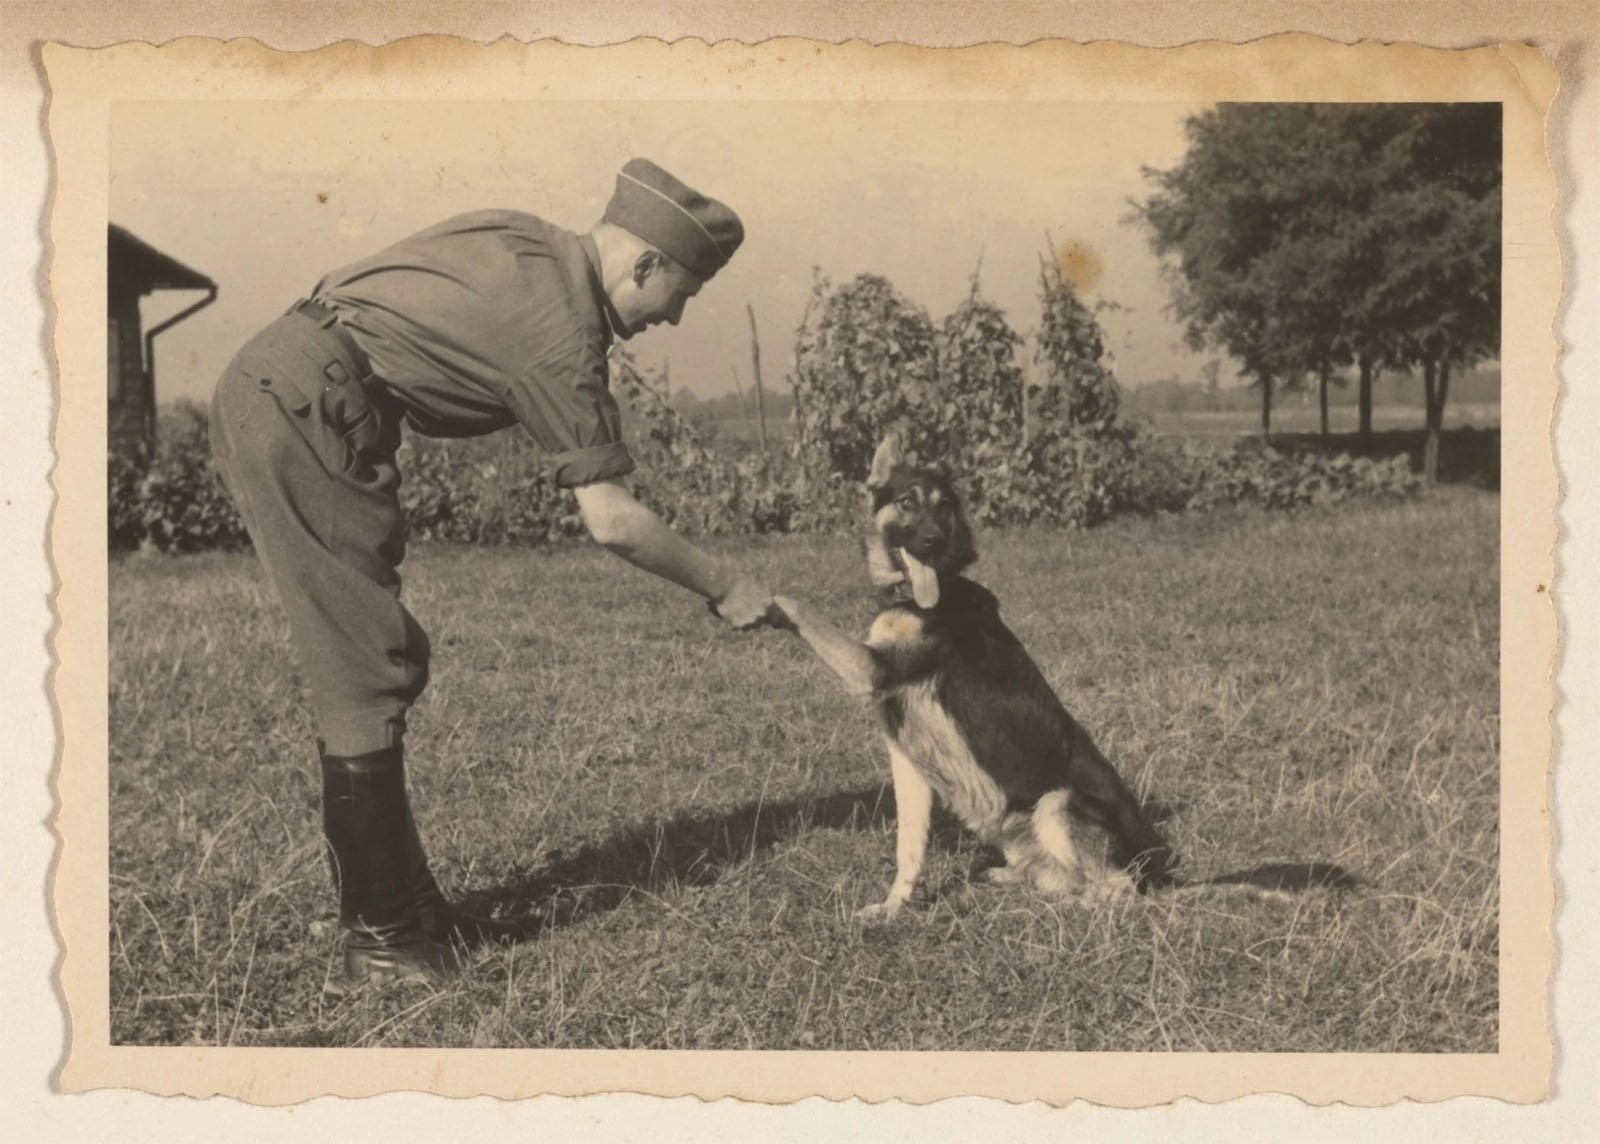 A sepia-toned photograph of a soldier wearing a cap and uniform shaking hands with a black and white dog sitting in a field. Trees and plants can be seen in the background. The edges of the photo are slightly worn and yellowed, giving it a vintage feel.